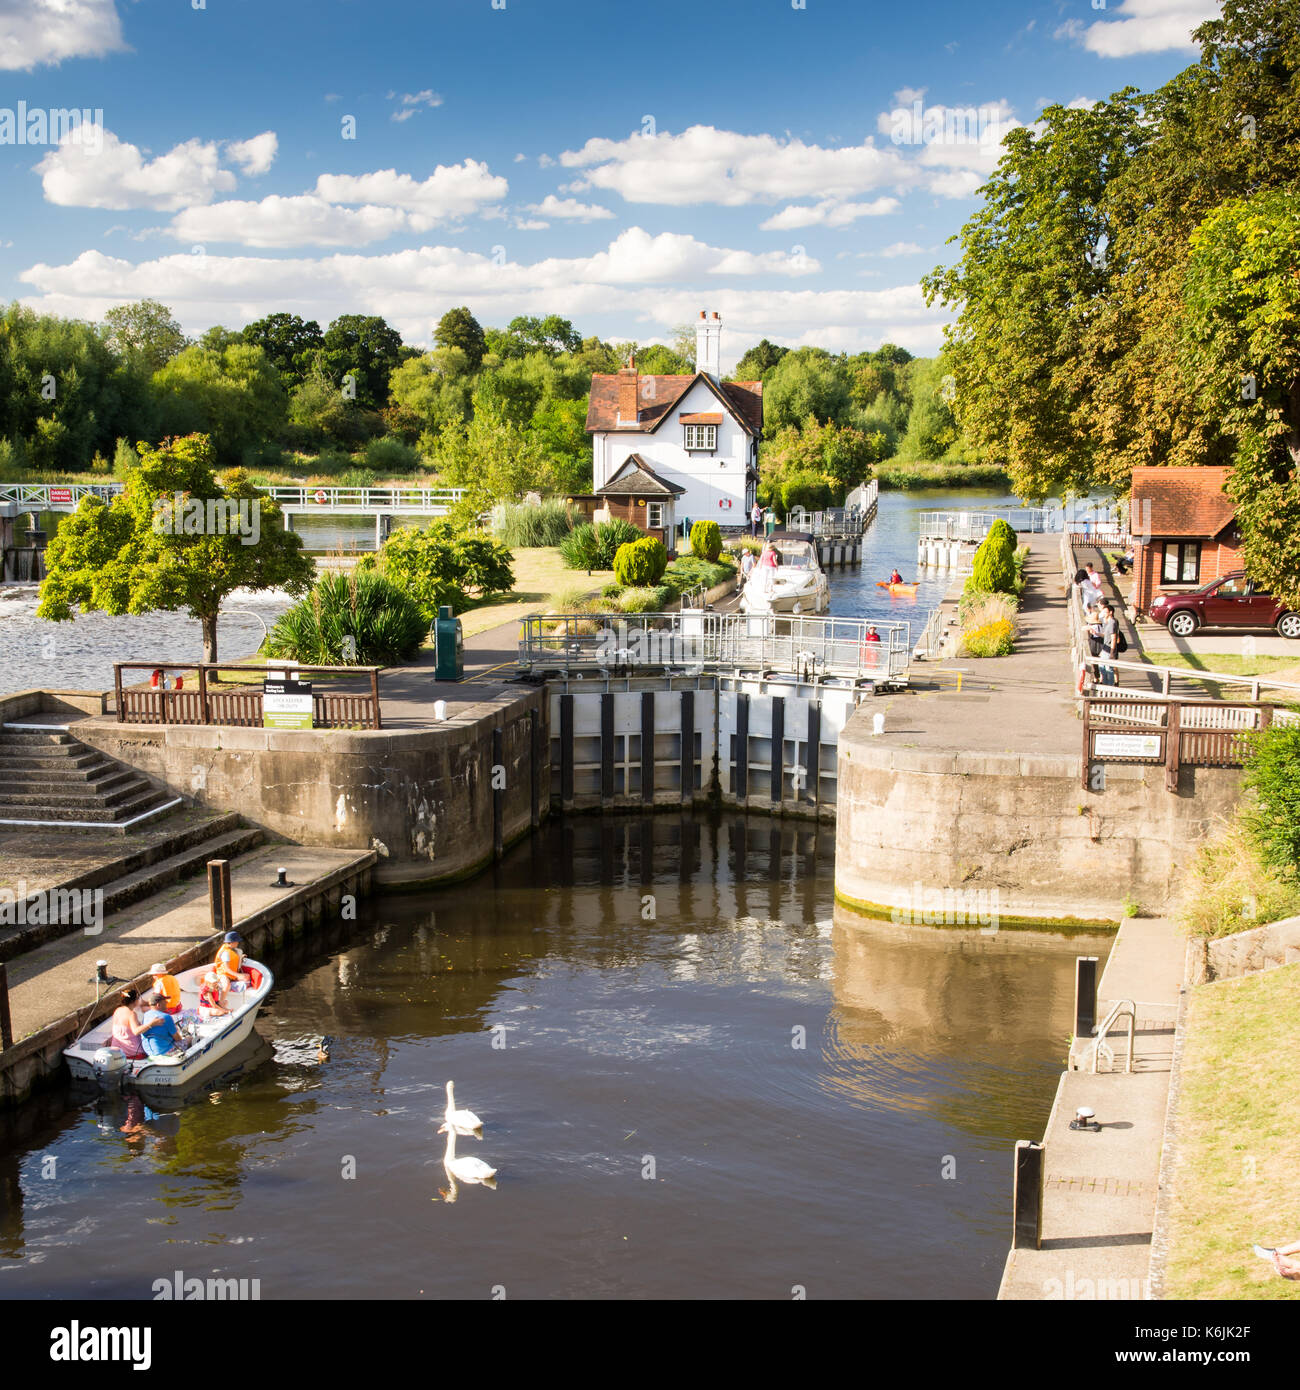 Reading, England, UK - August 29, 2016: The weir and lock on the River Thames at Goring in Berkshire. Stock Photo